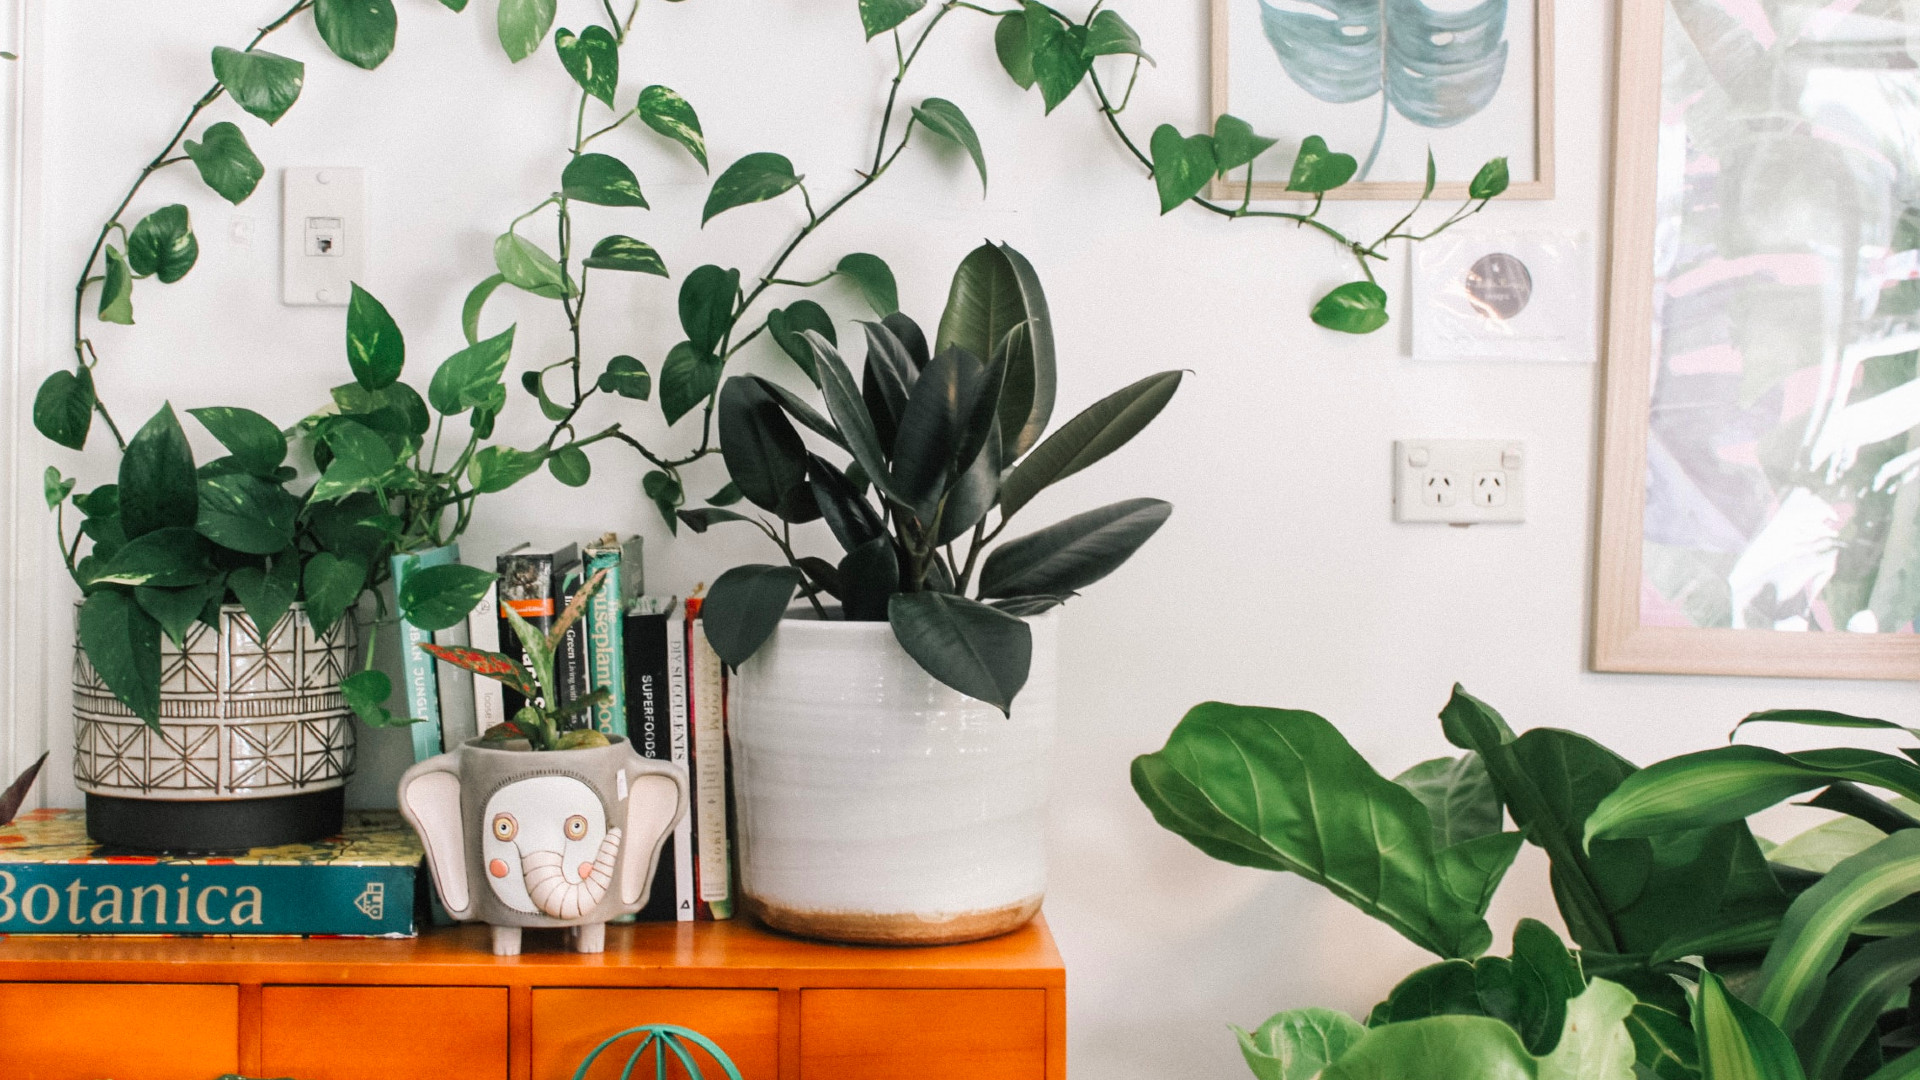 How to Find the Top 10 Sexiest Indoor Plants